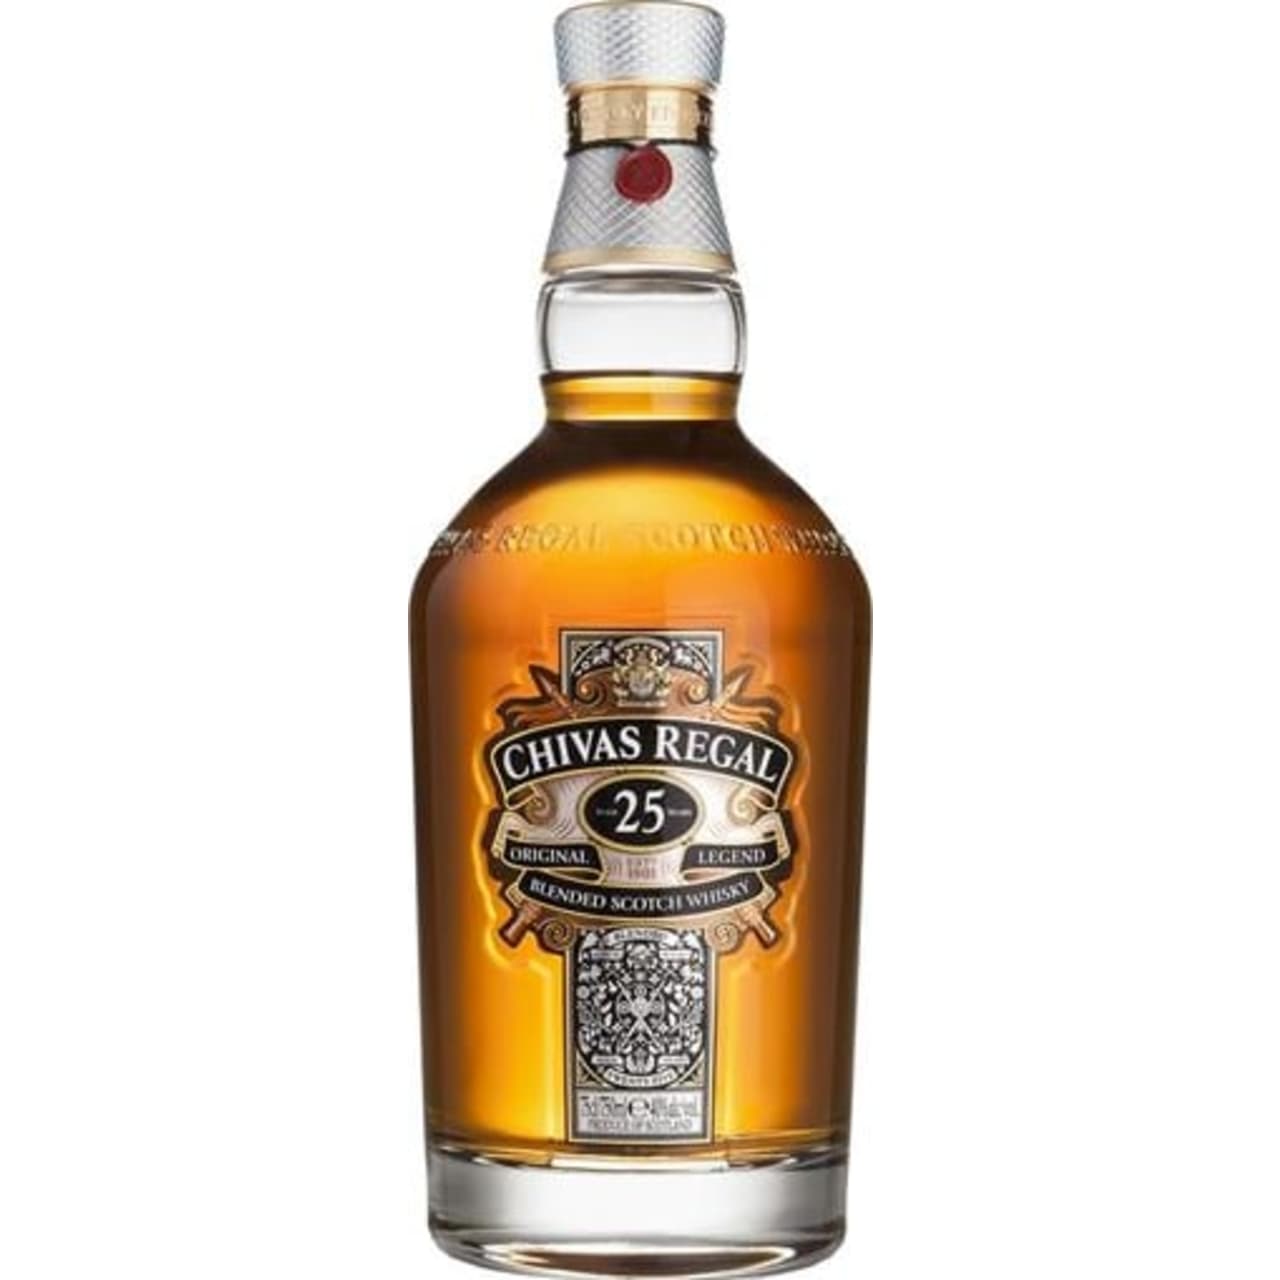 Product Image - Chivas Regal 25 Year Old Scotch Whisky